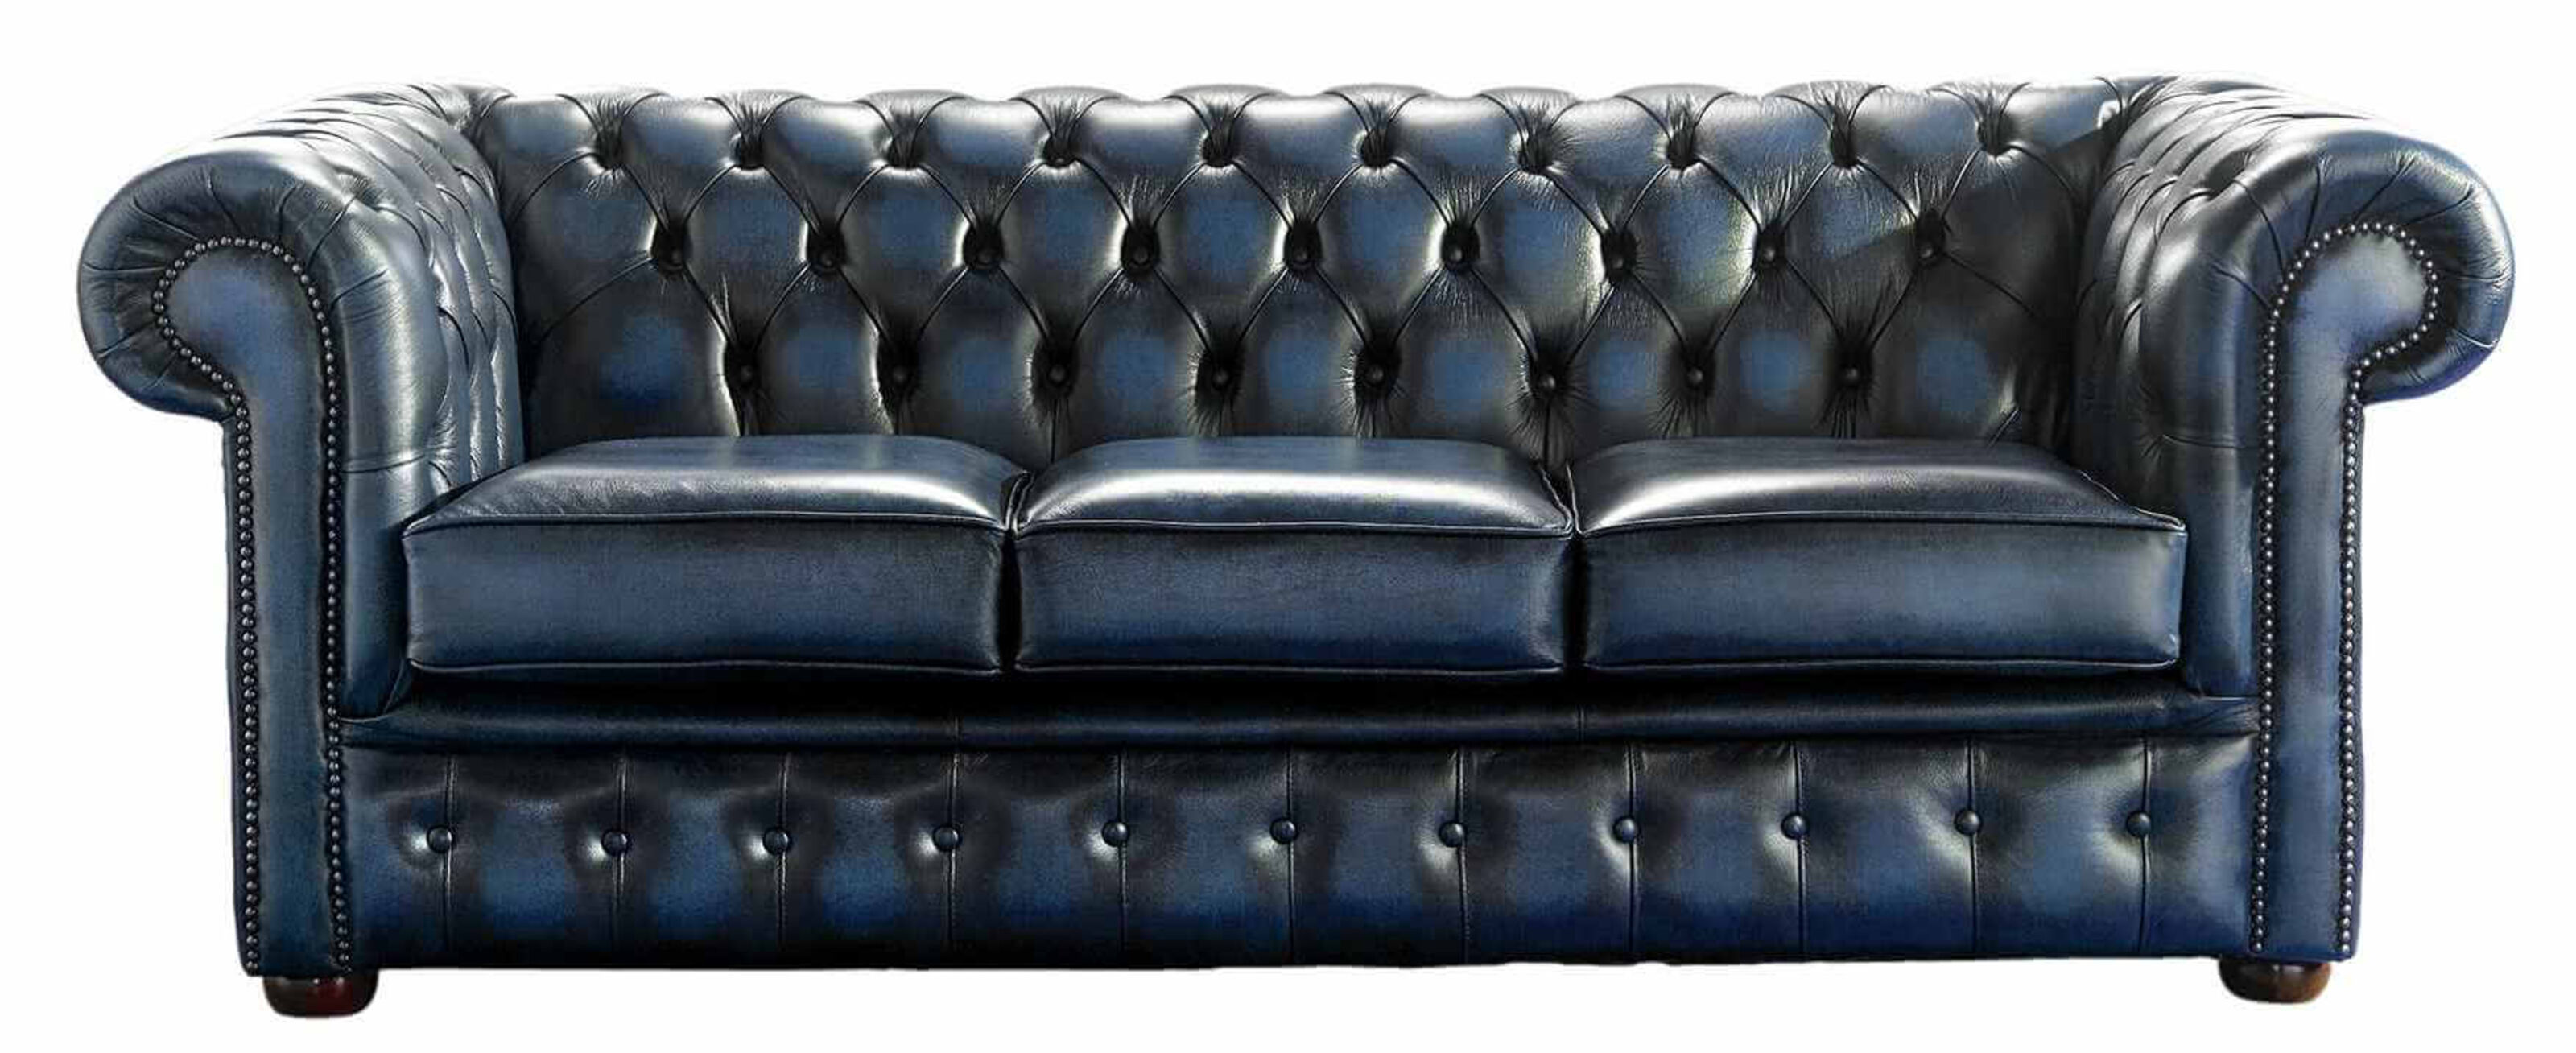 Historic Chic The Enduring Legacy of Chesterfield Sofa Design  %Post Title